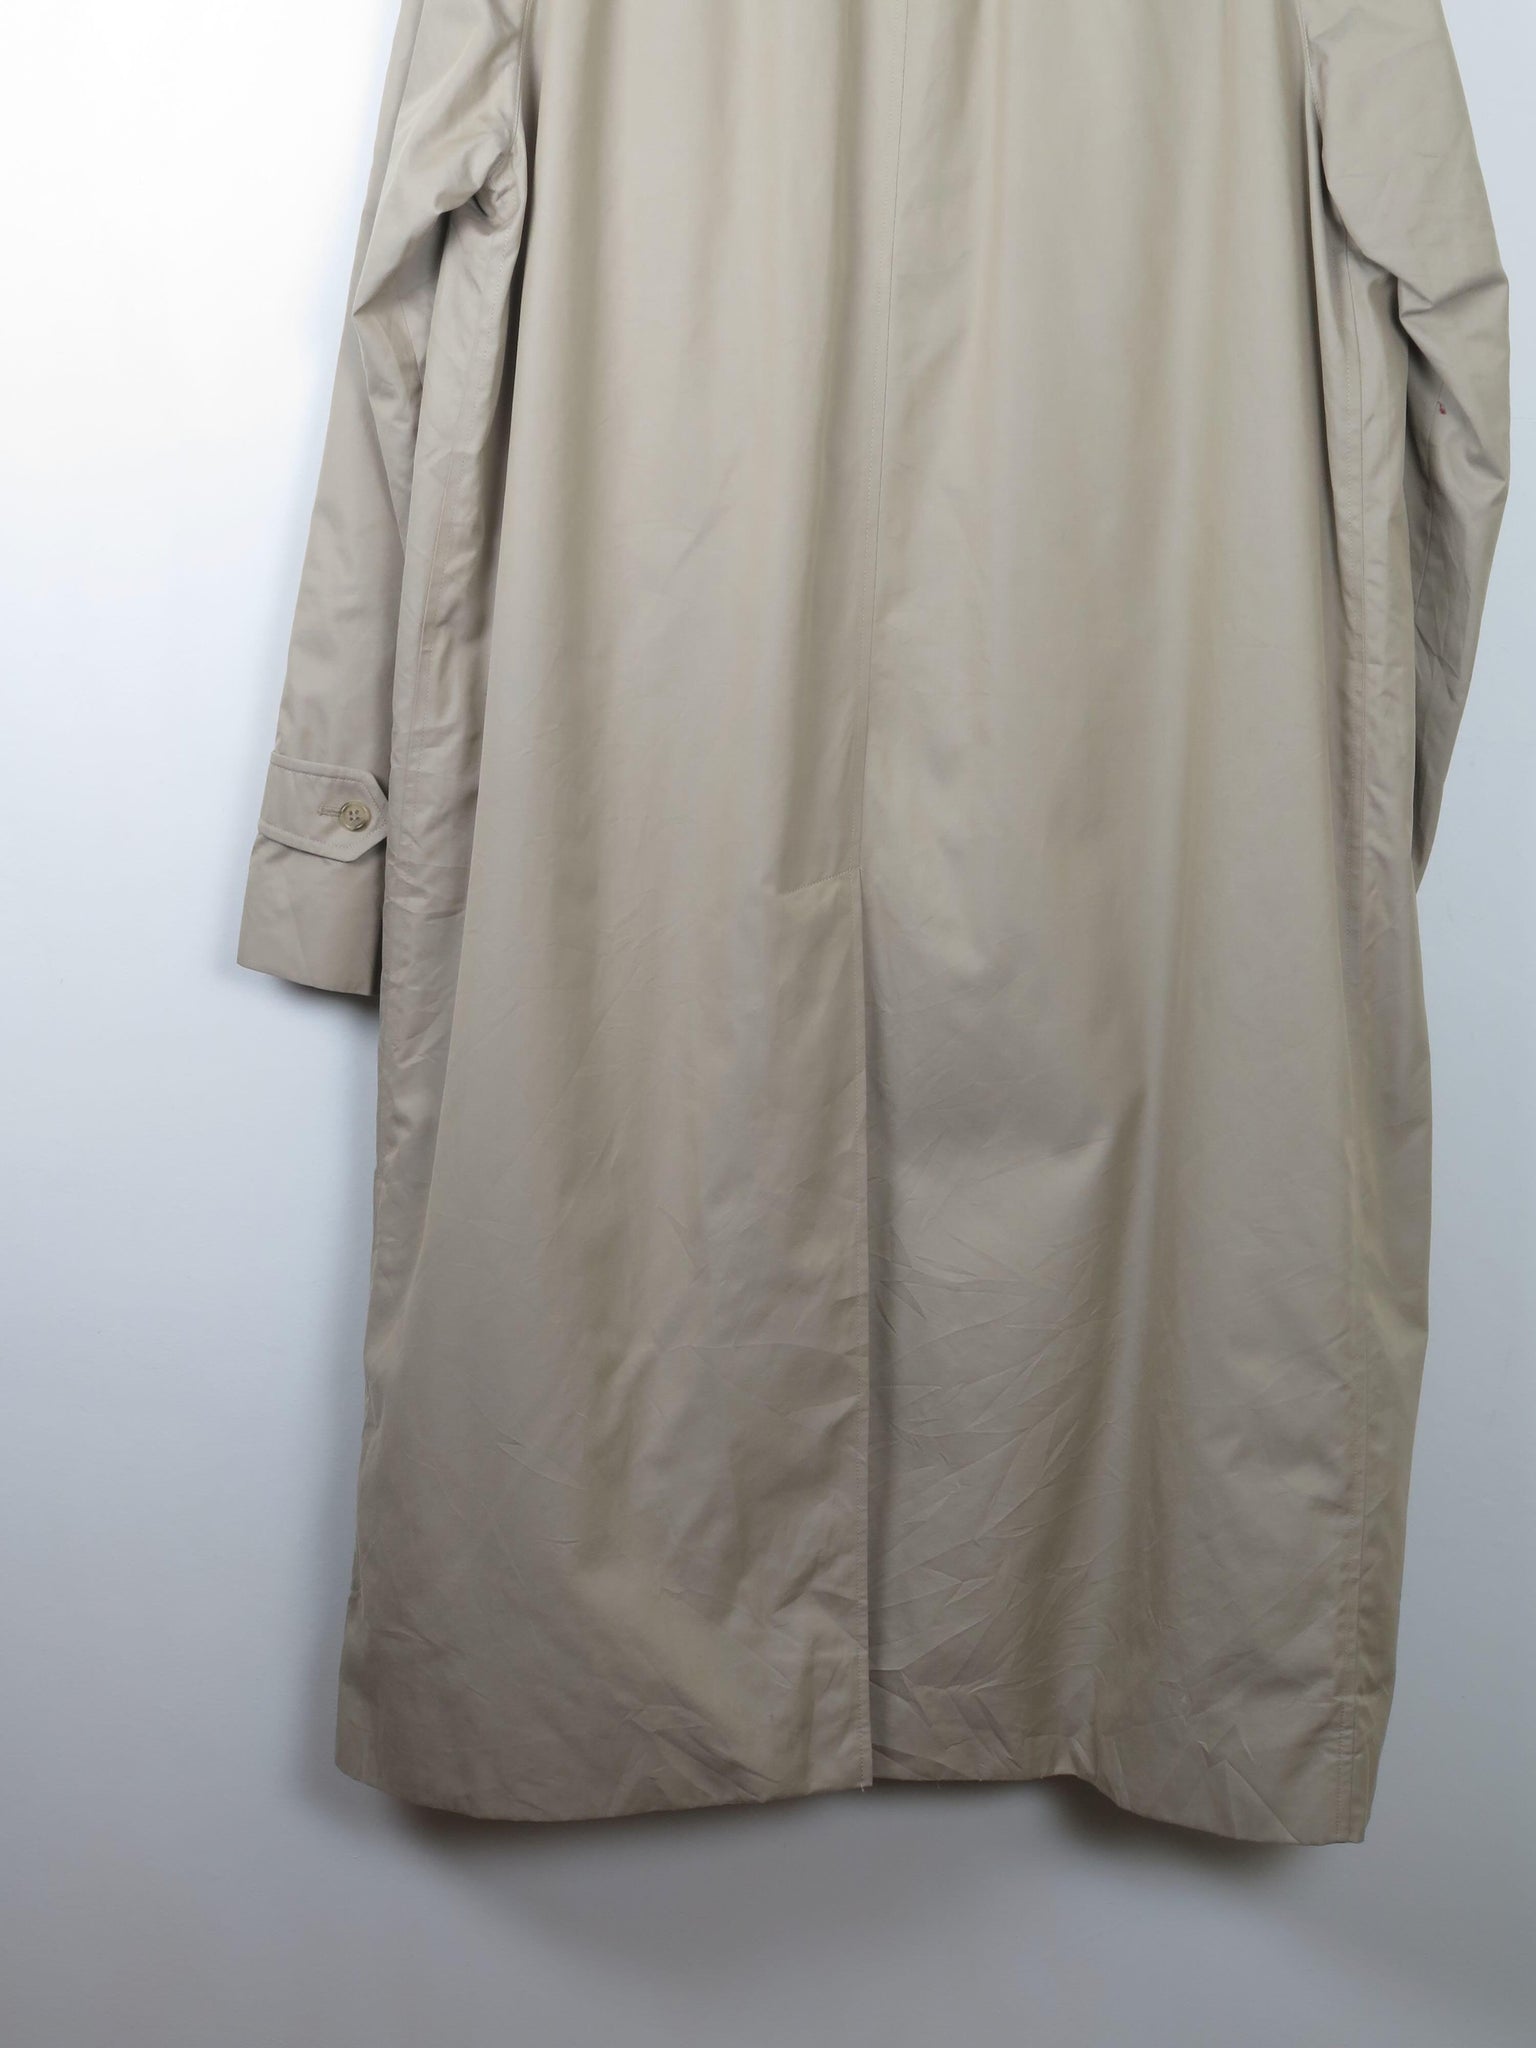 Men's Taupe/Beige Burberry Trench Coat L/XL - The Harlequin